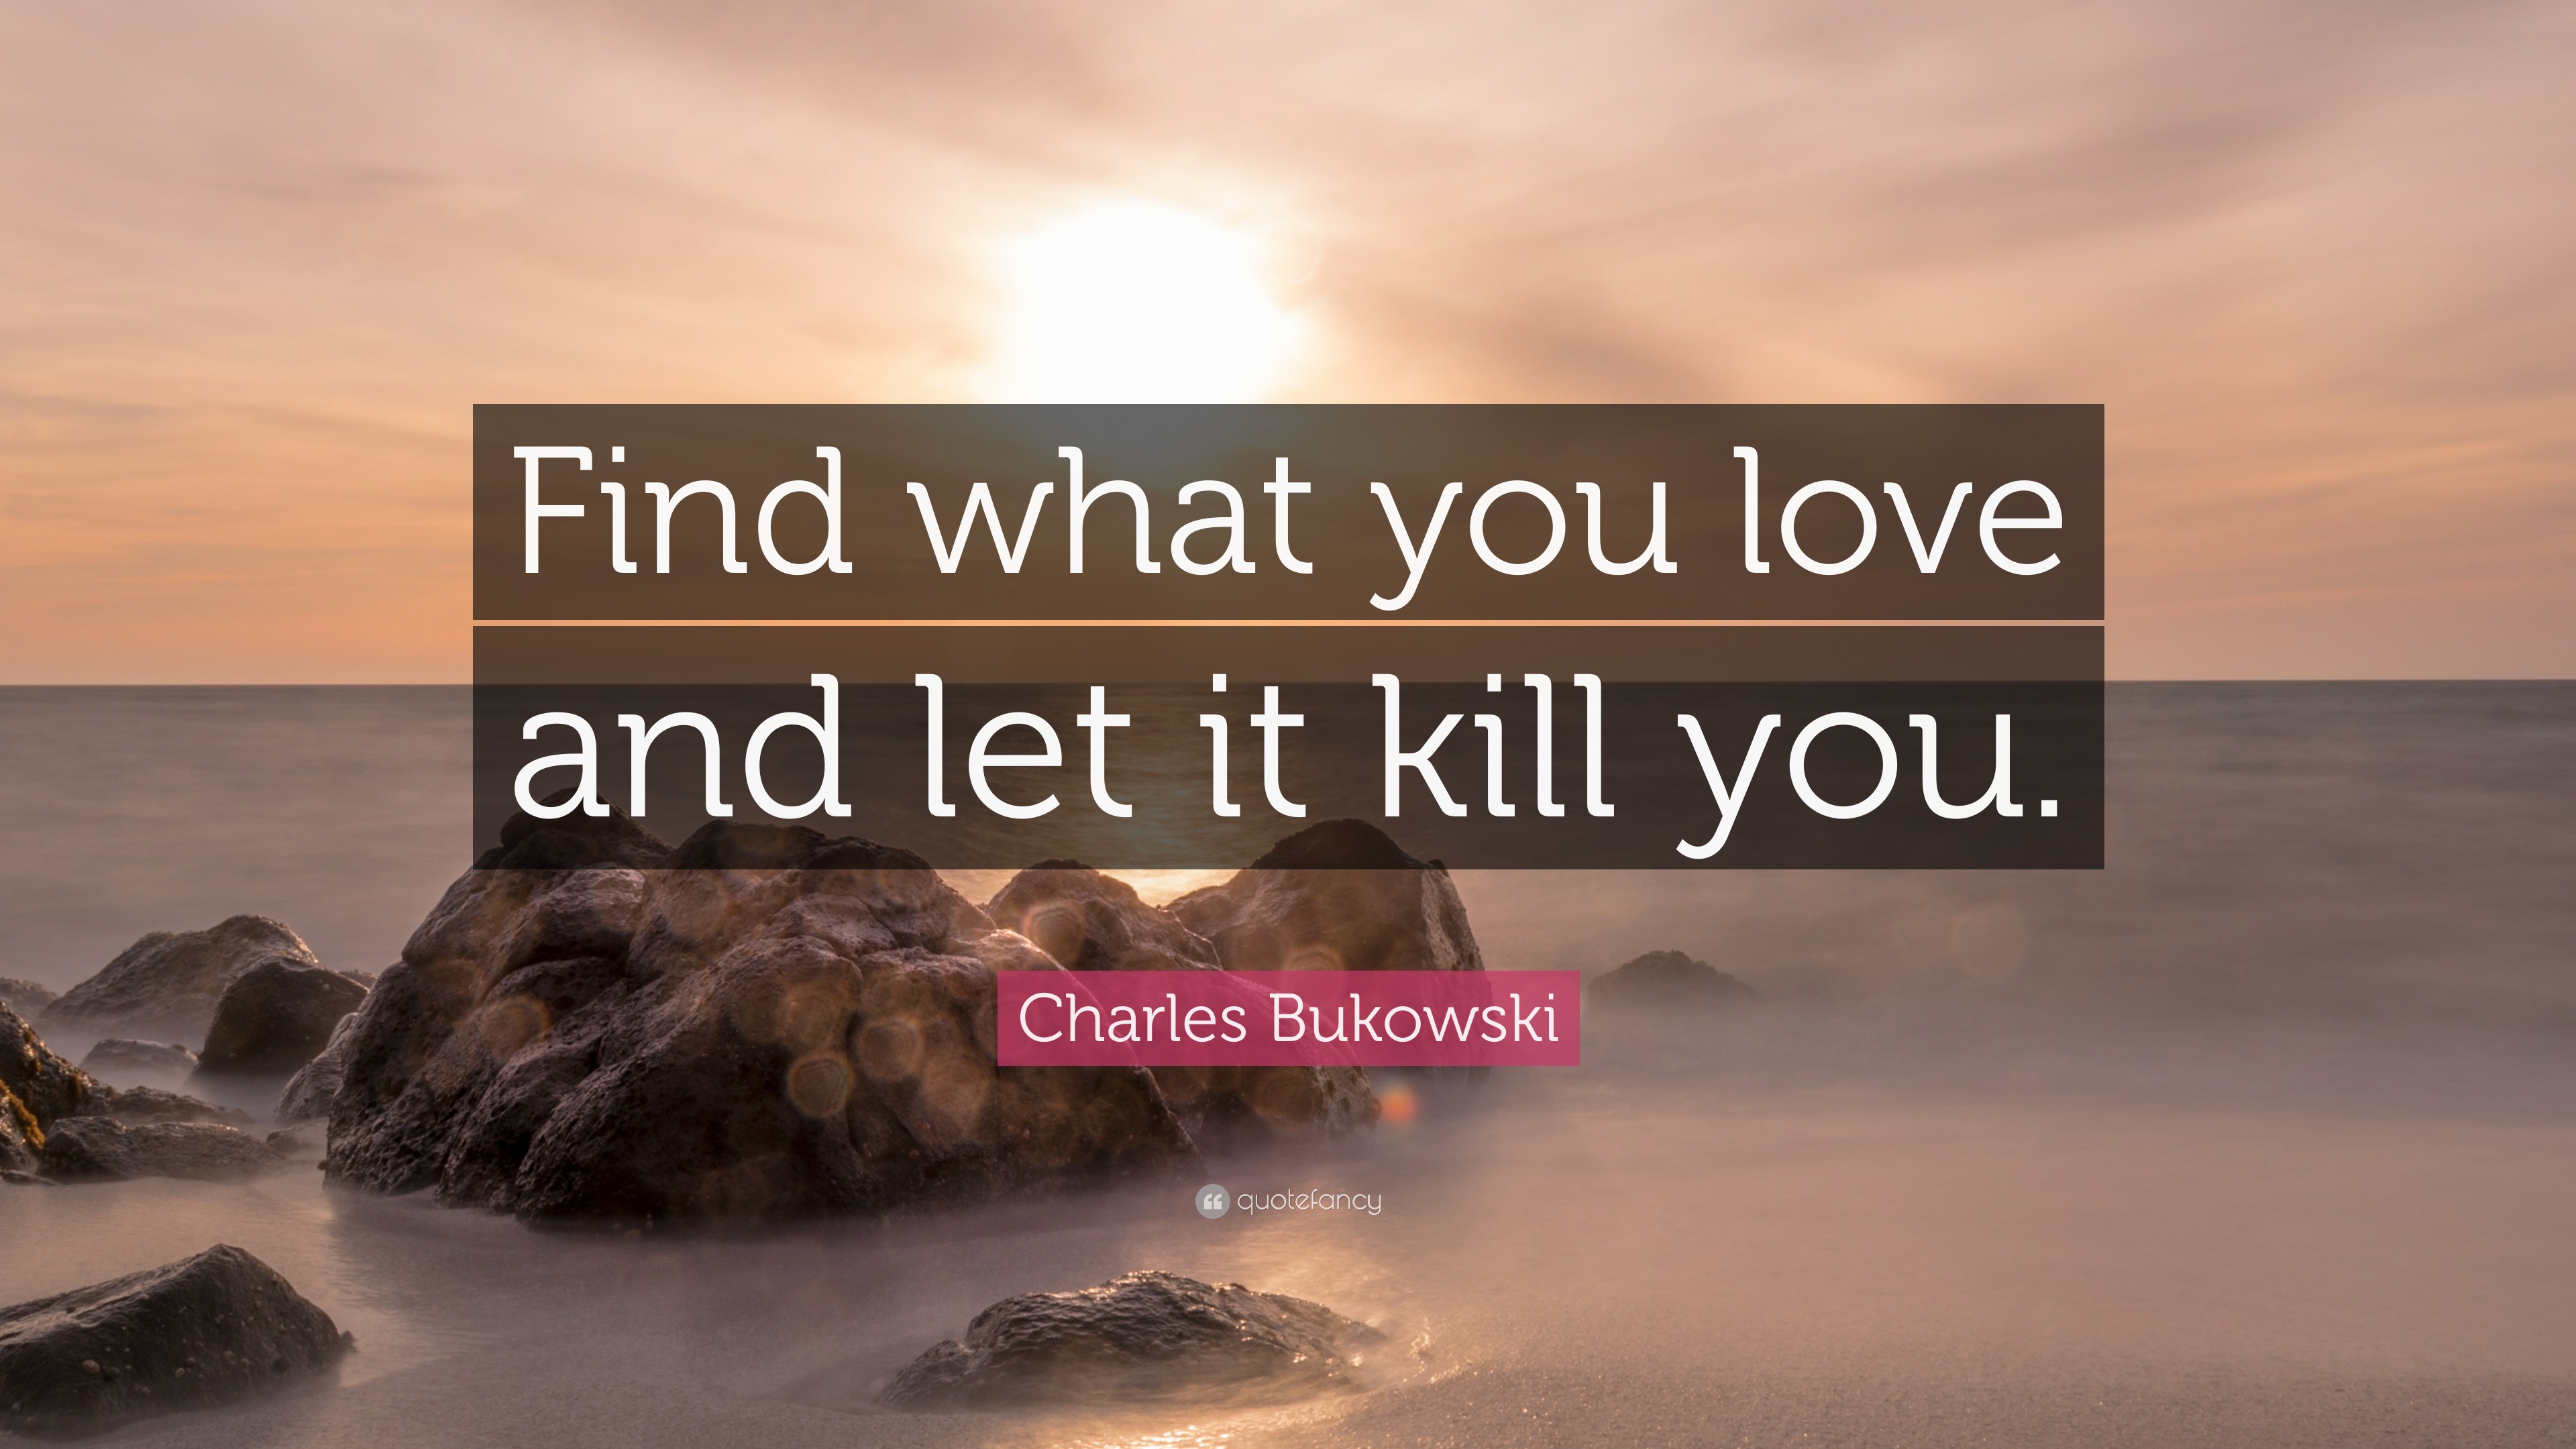 4676578 Charles Bukowski Quote Find what you love and let it kill you